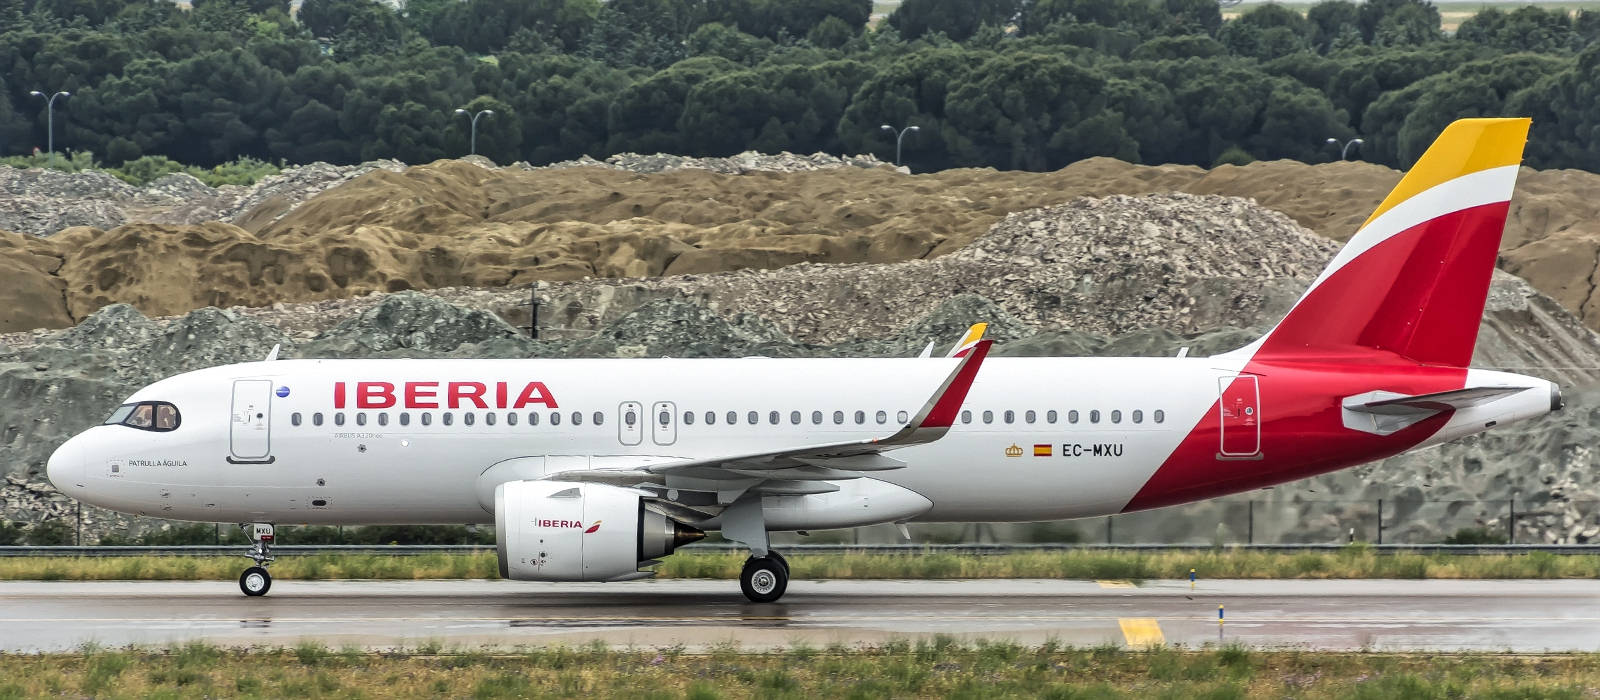 Iberia Airlines Airplane Side View On Runway Wallpaper